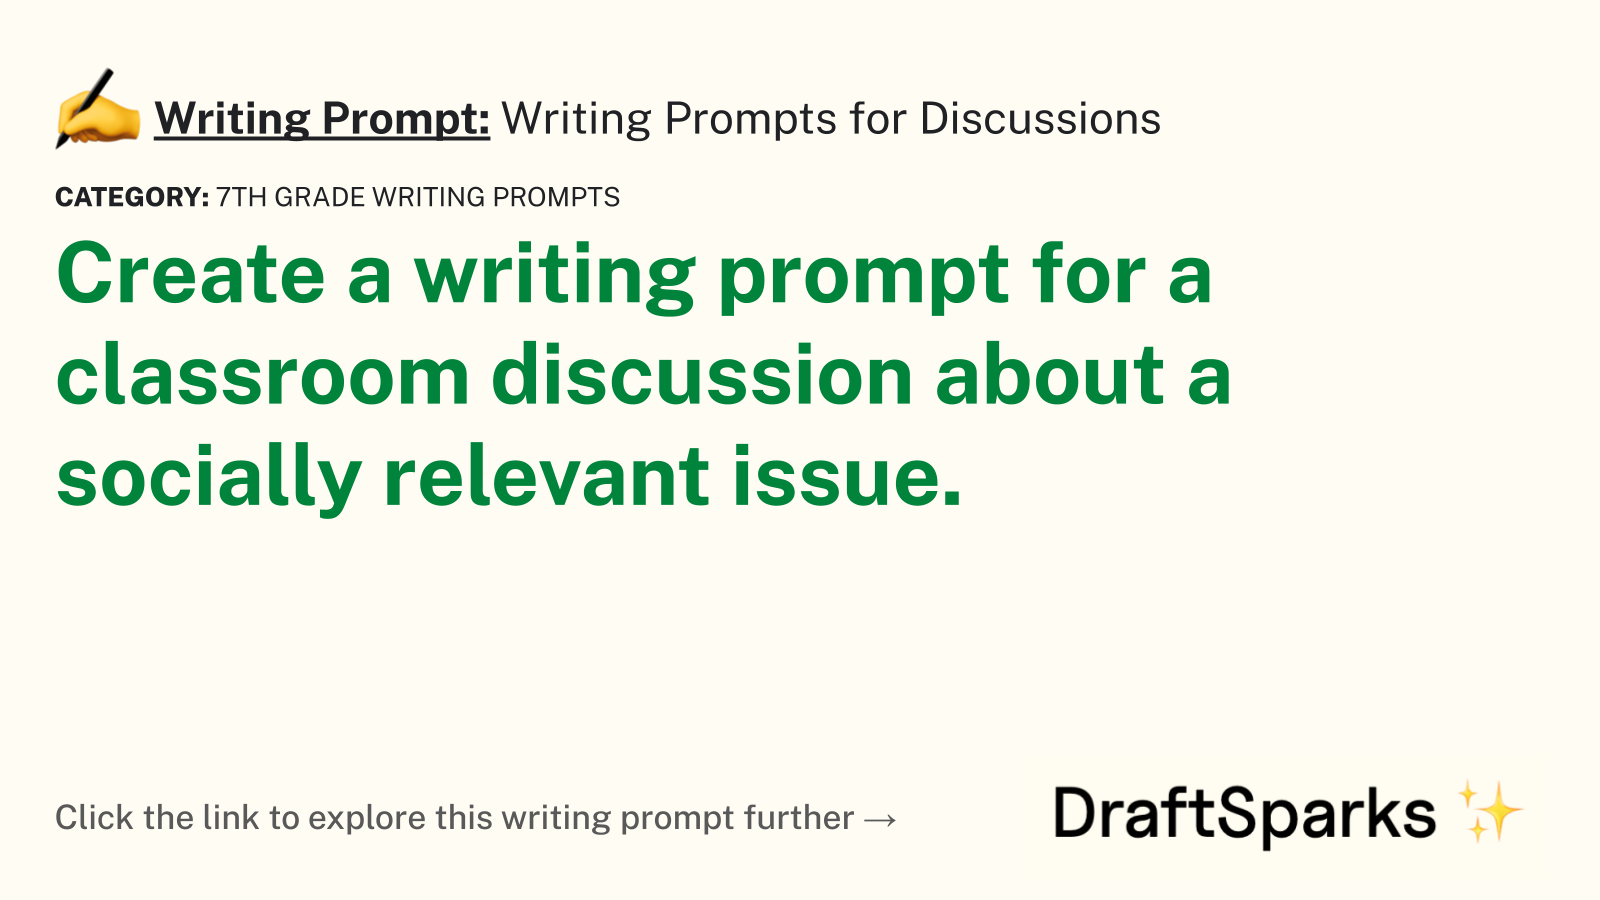 Writing Prompts for Discussions